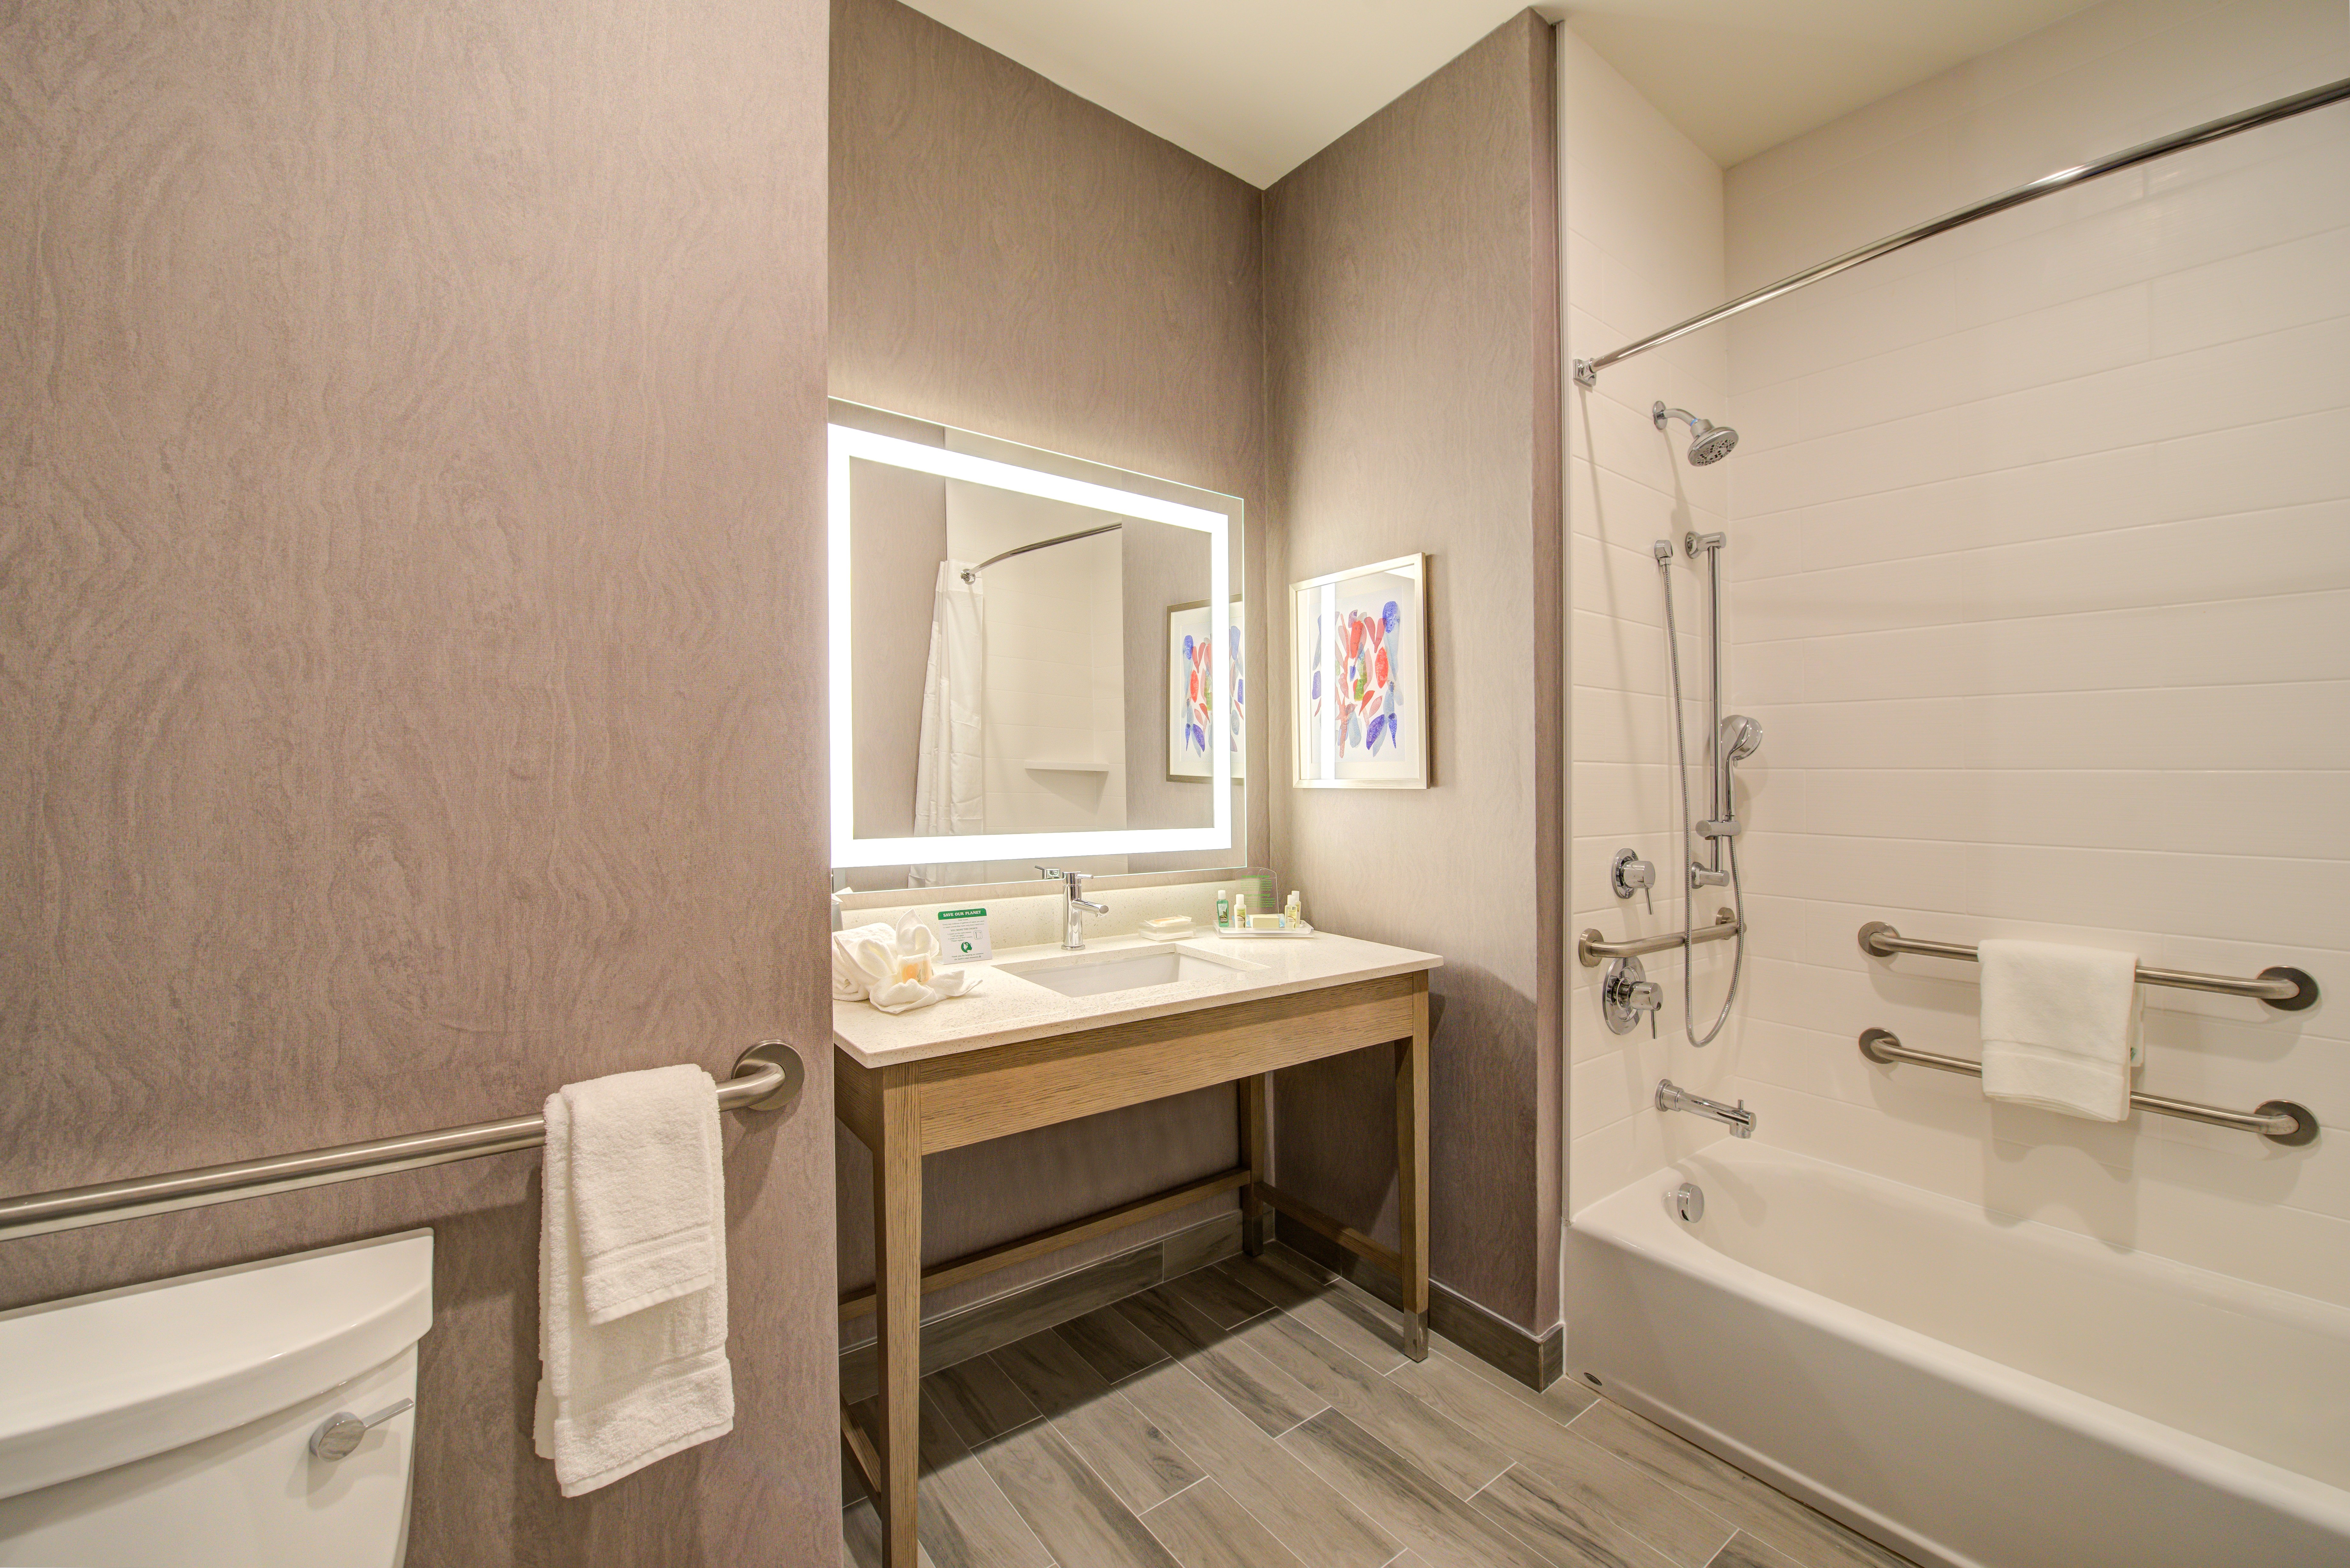 Enjoy the spacious bathroom in this accessible room